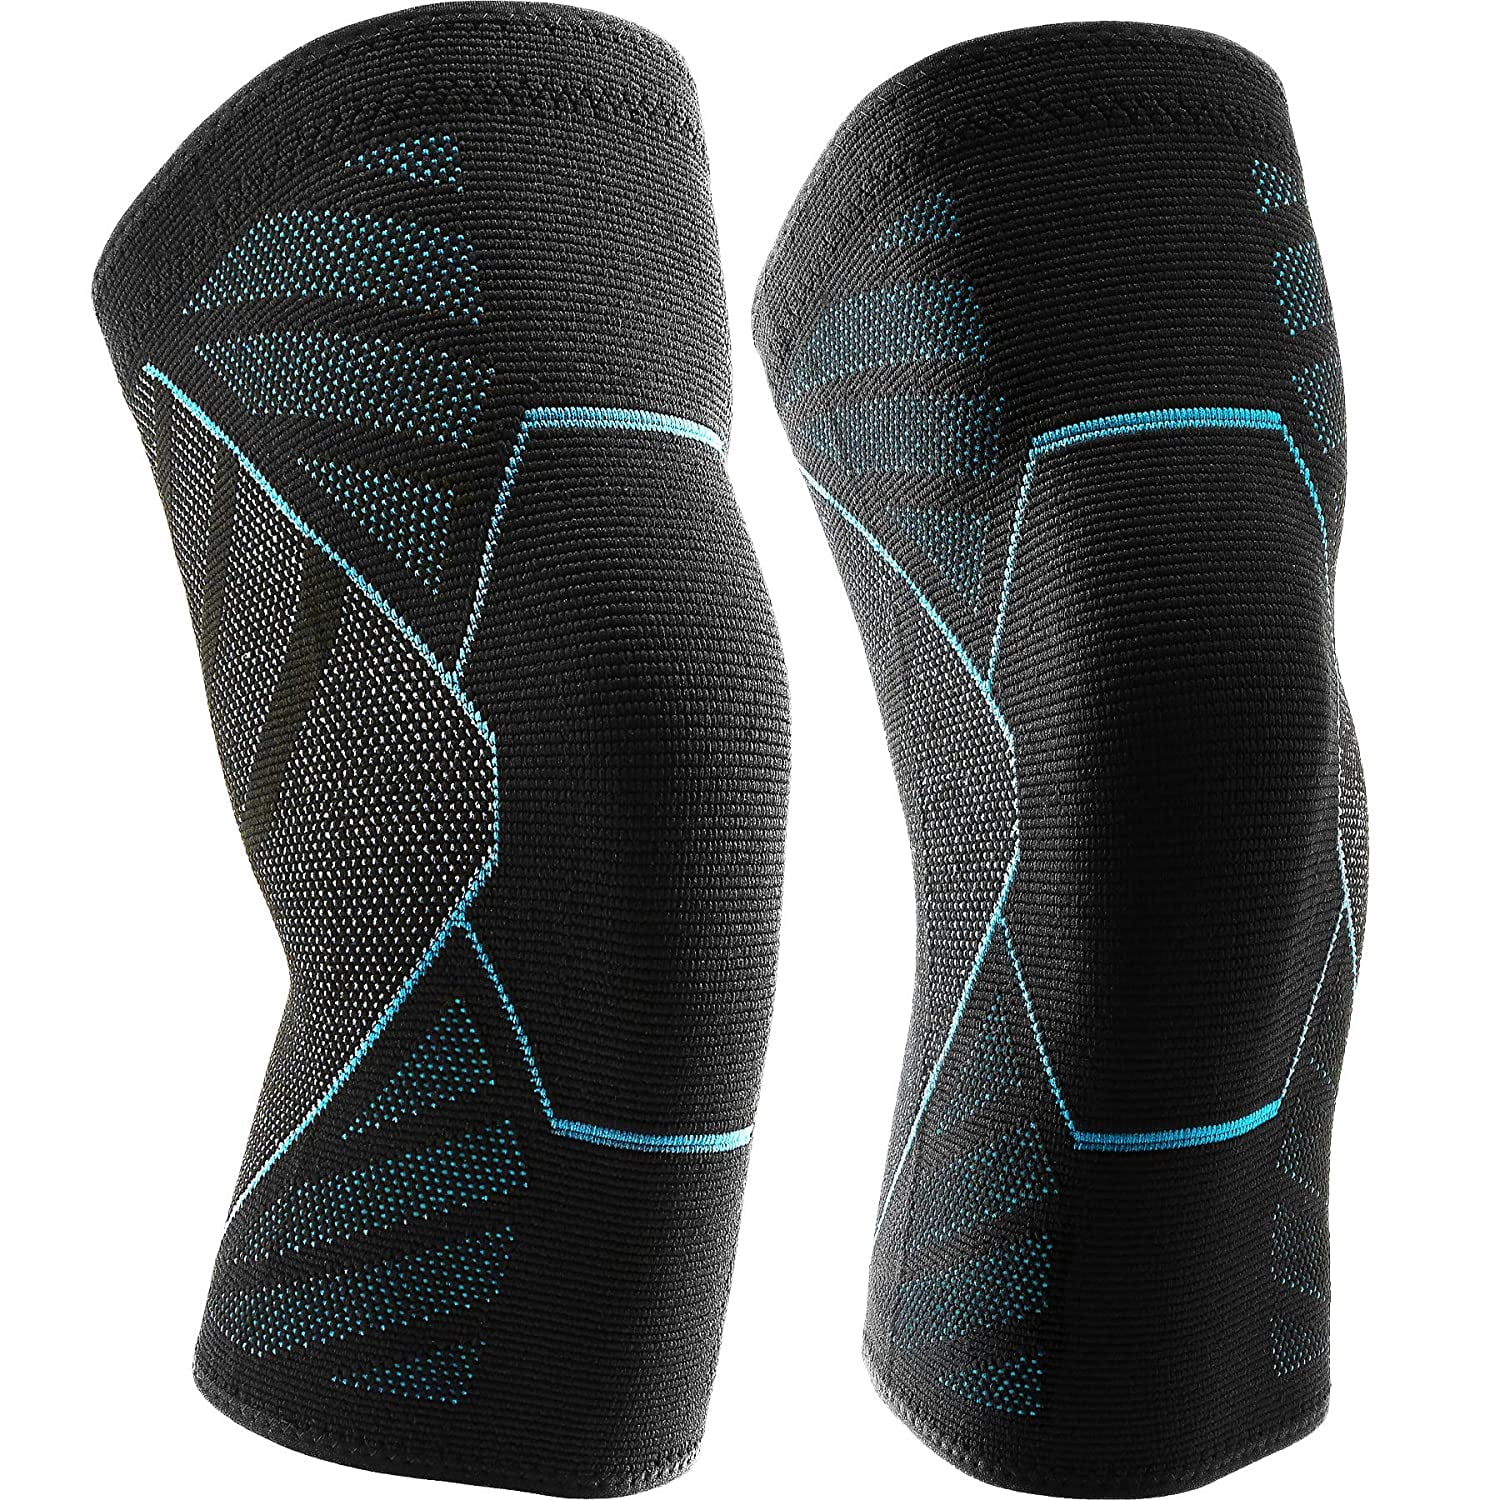 Biking Crossfit Workout AIMERDAY Compression Knee Sleeves 1 Pair Knee Brace for Men & Women Sports & Everyday Use Jogging Non Slip Knee Support for Running Weightlifting Basketball Gym